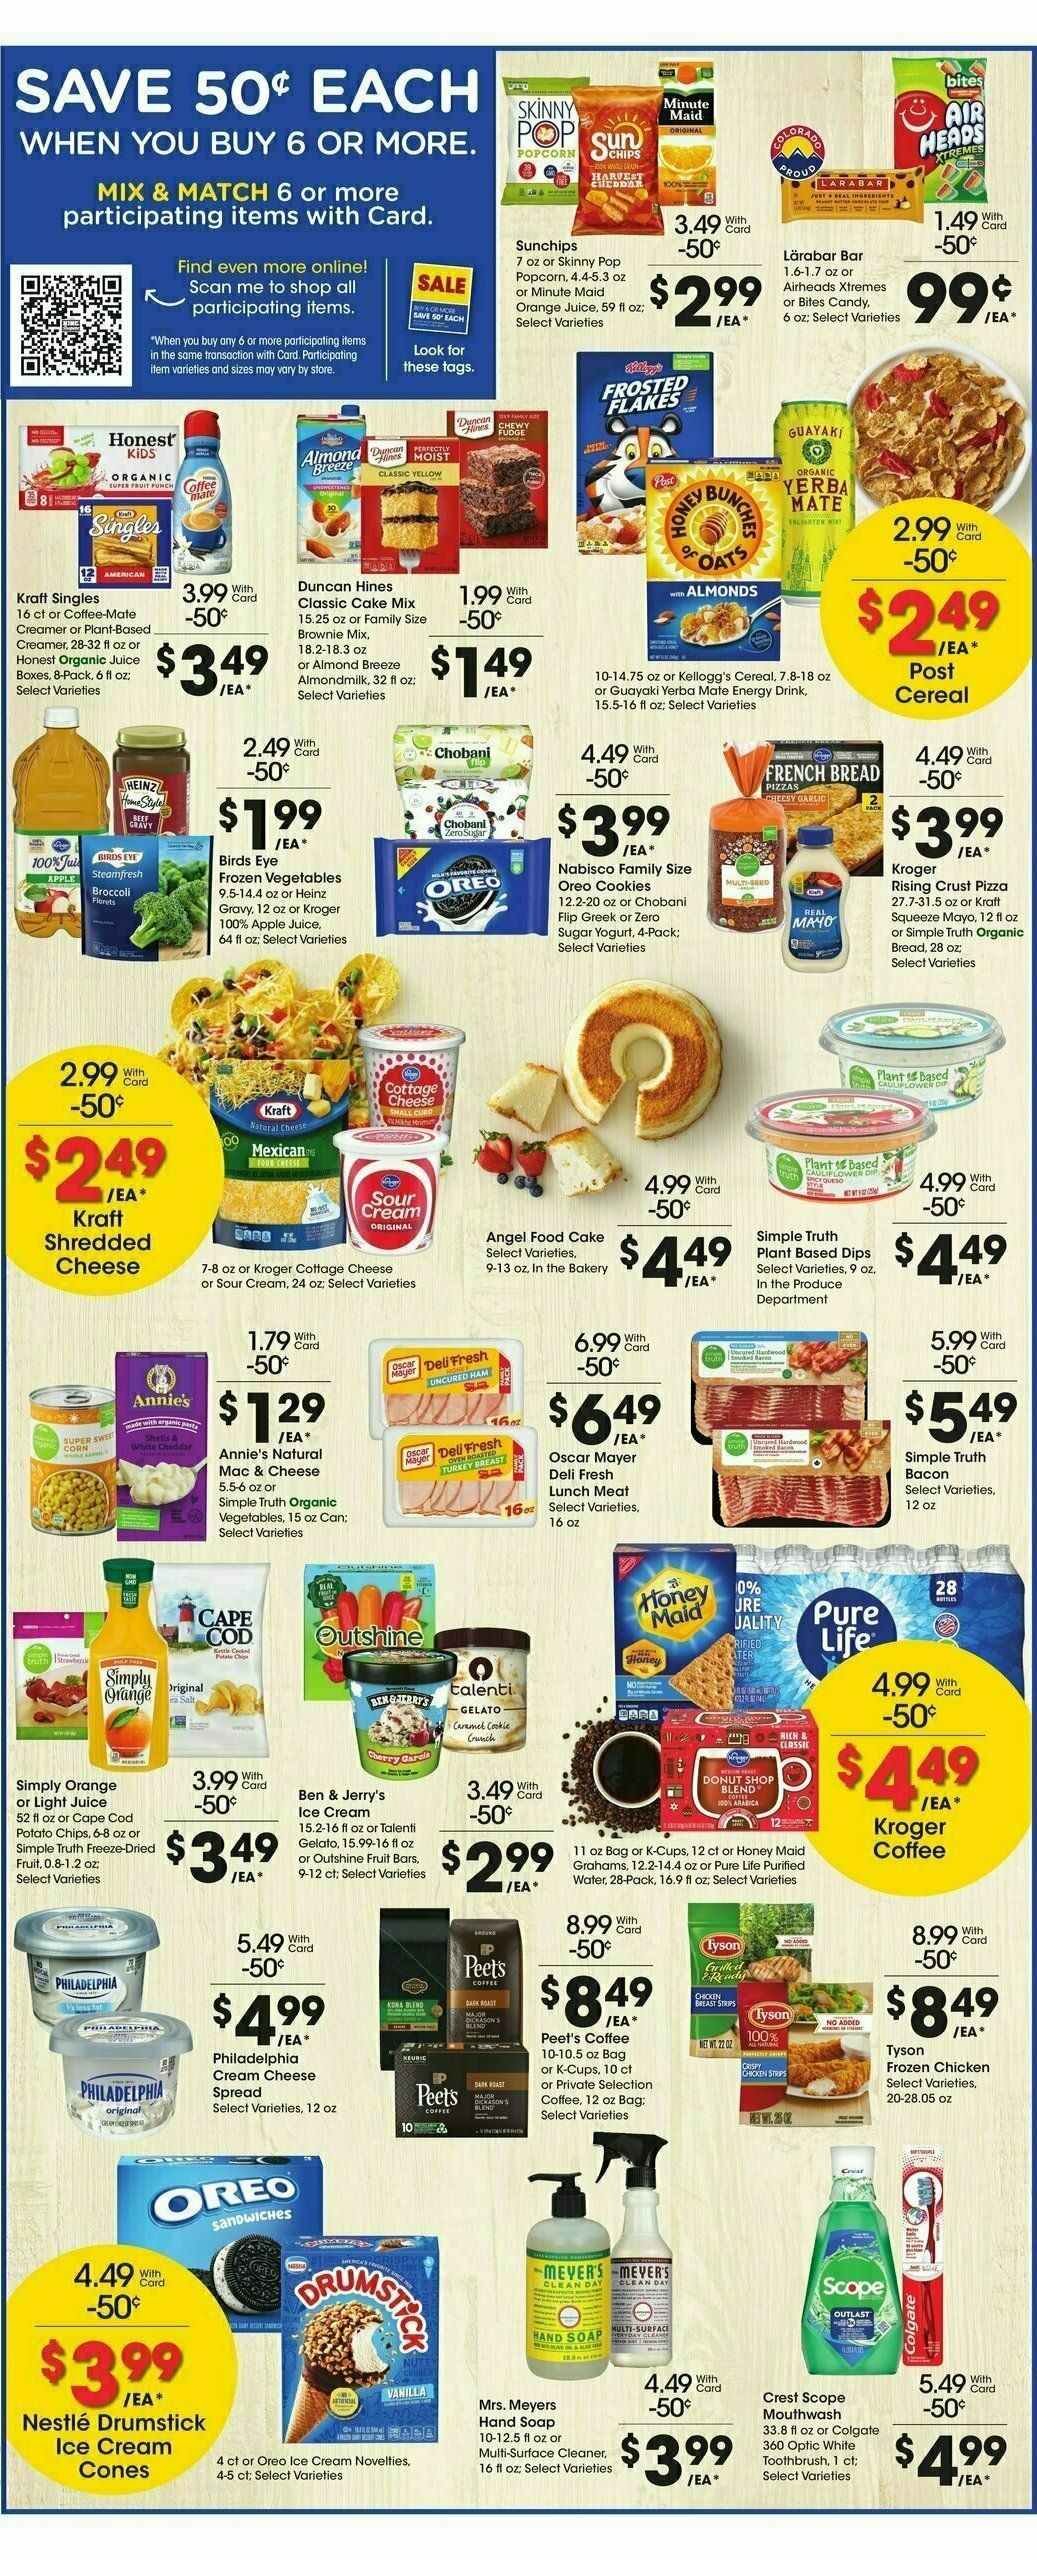 King Soopers Weekly Ad from January 17